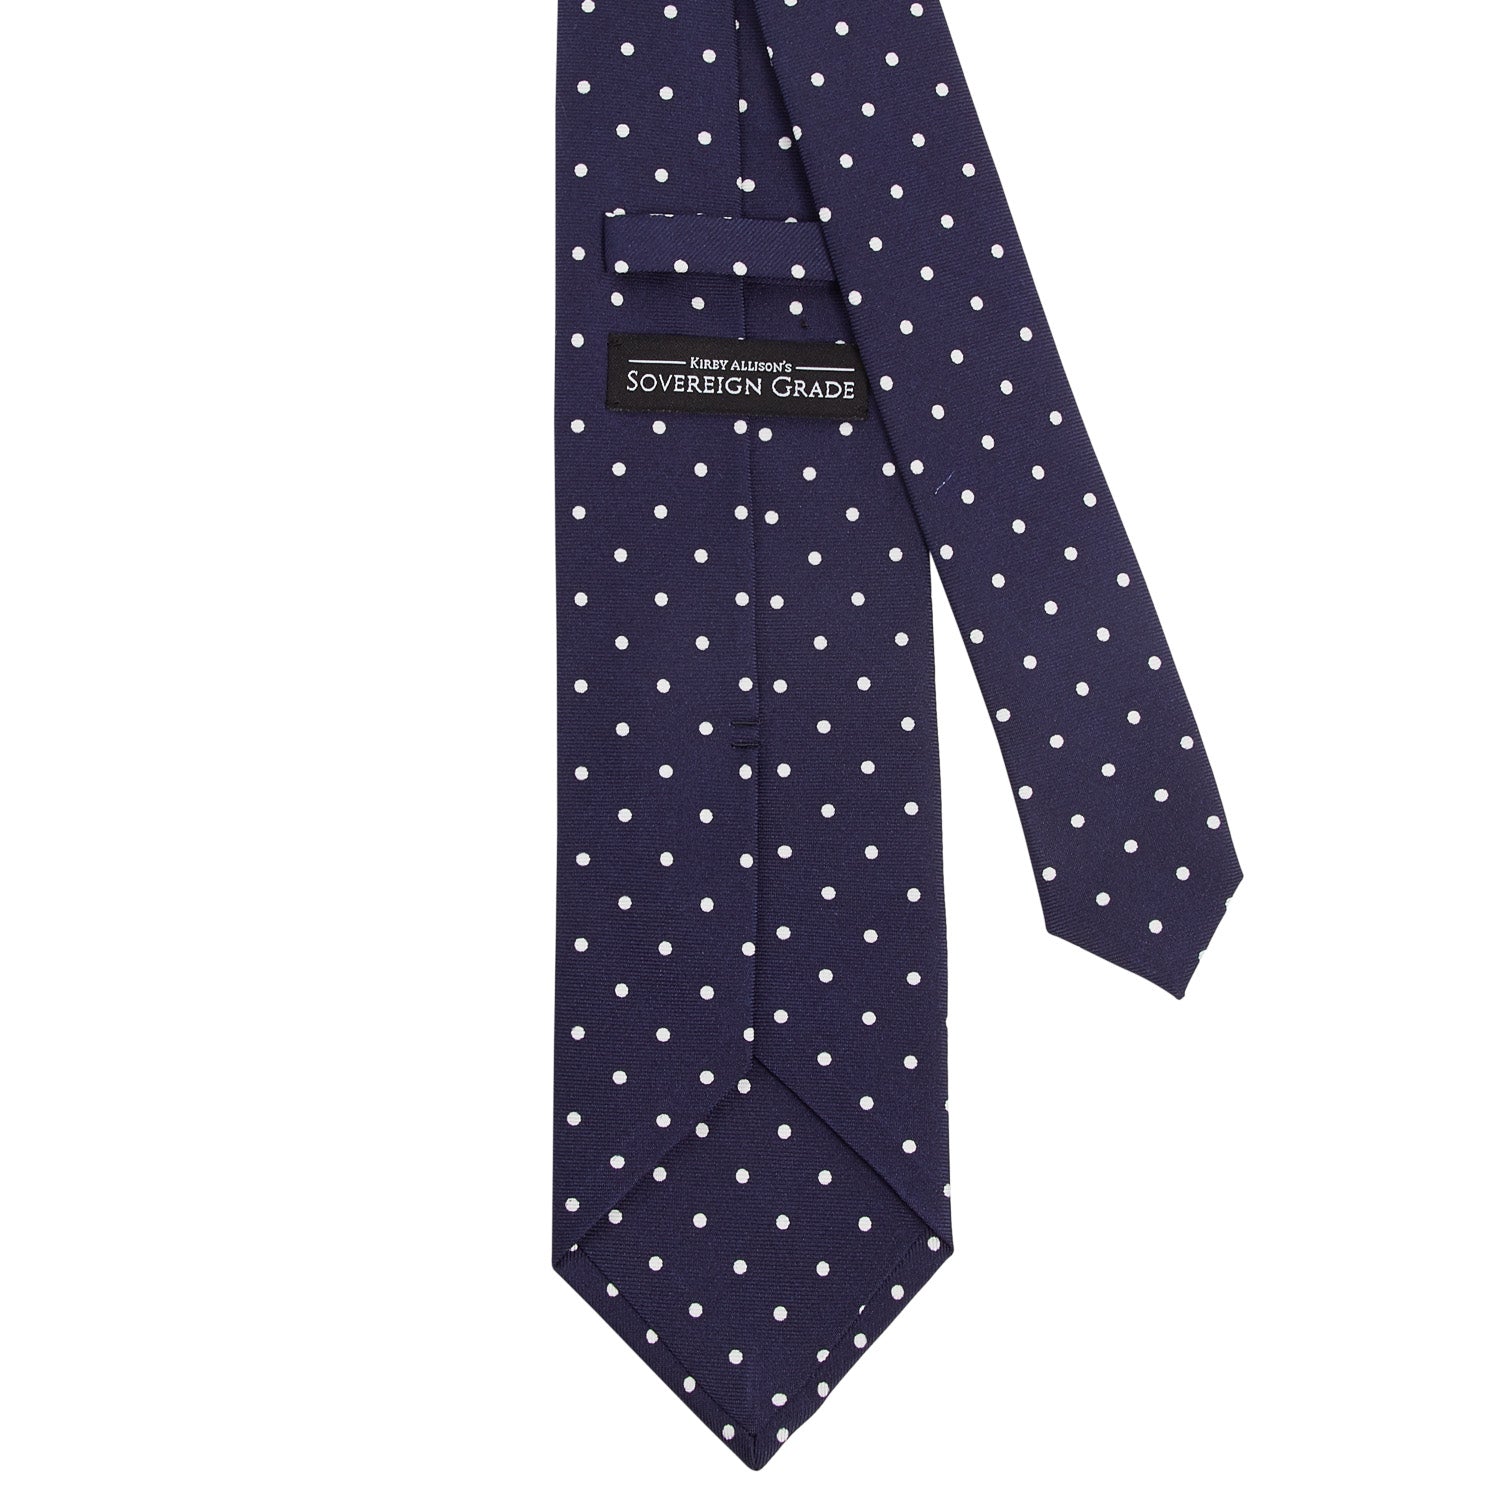 A quality Sovereign Grade Navy White London Dot Printed Silk Tie by KirbyAllison.com on a white background.